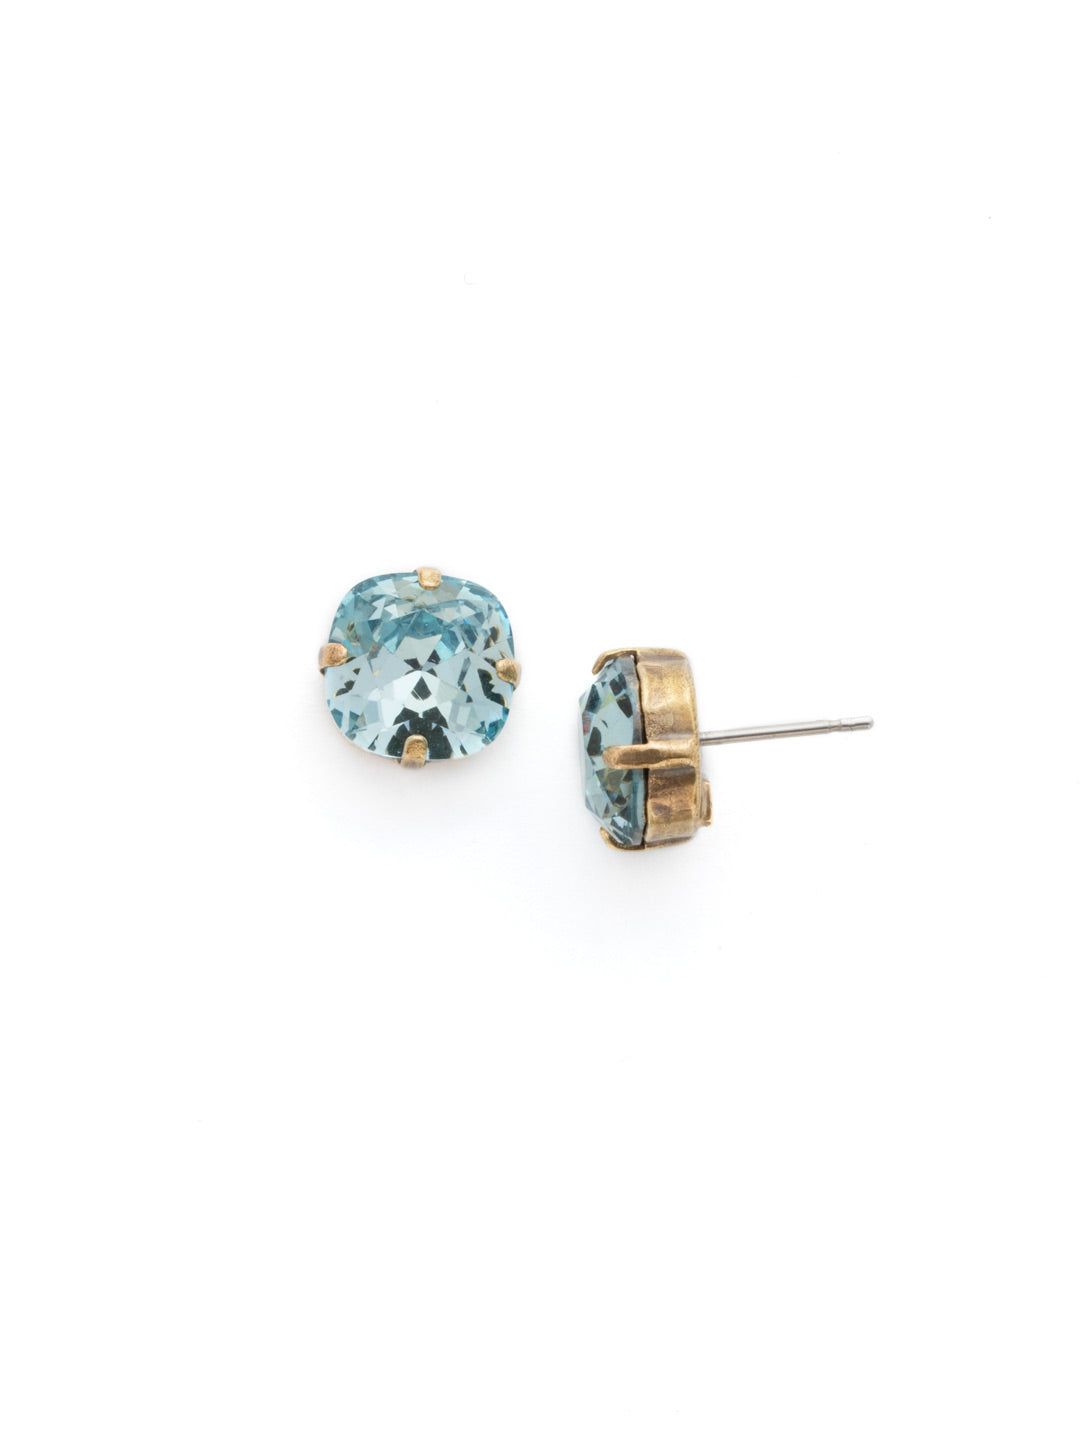 Halcyon Stud Earrings - EDH25AGLAQ - <p>A beautiful, luminous cushion-cut crystal in a classic four-pronged setting that's ideal for everyday wear. From Sorrelli's Light Aqua collection in our Antique Gold-tone finish.</p>